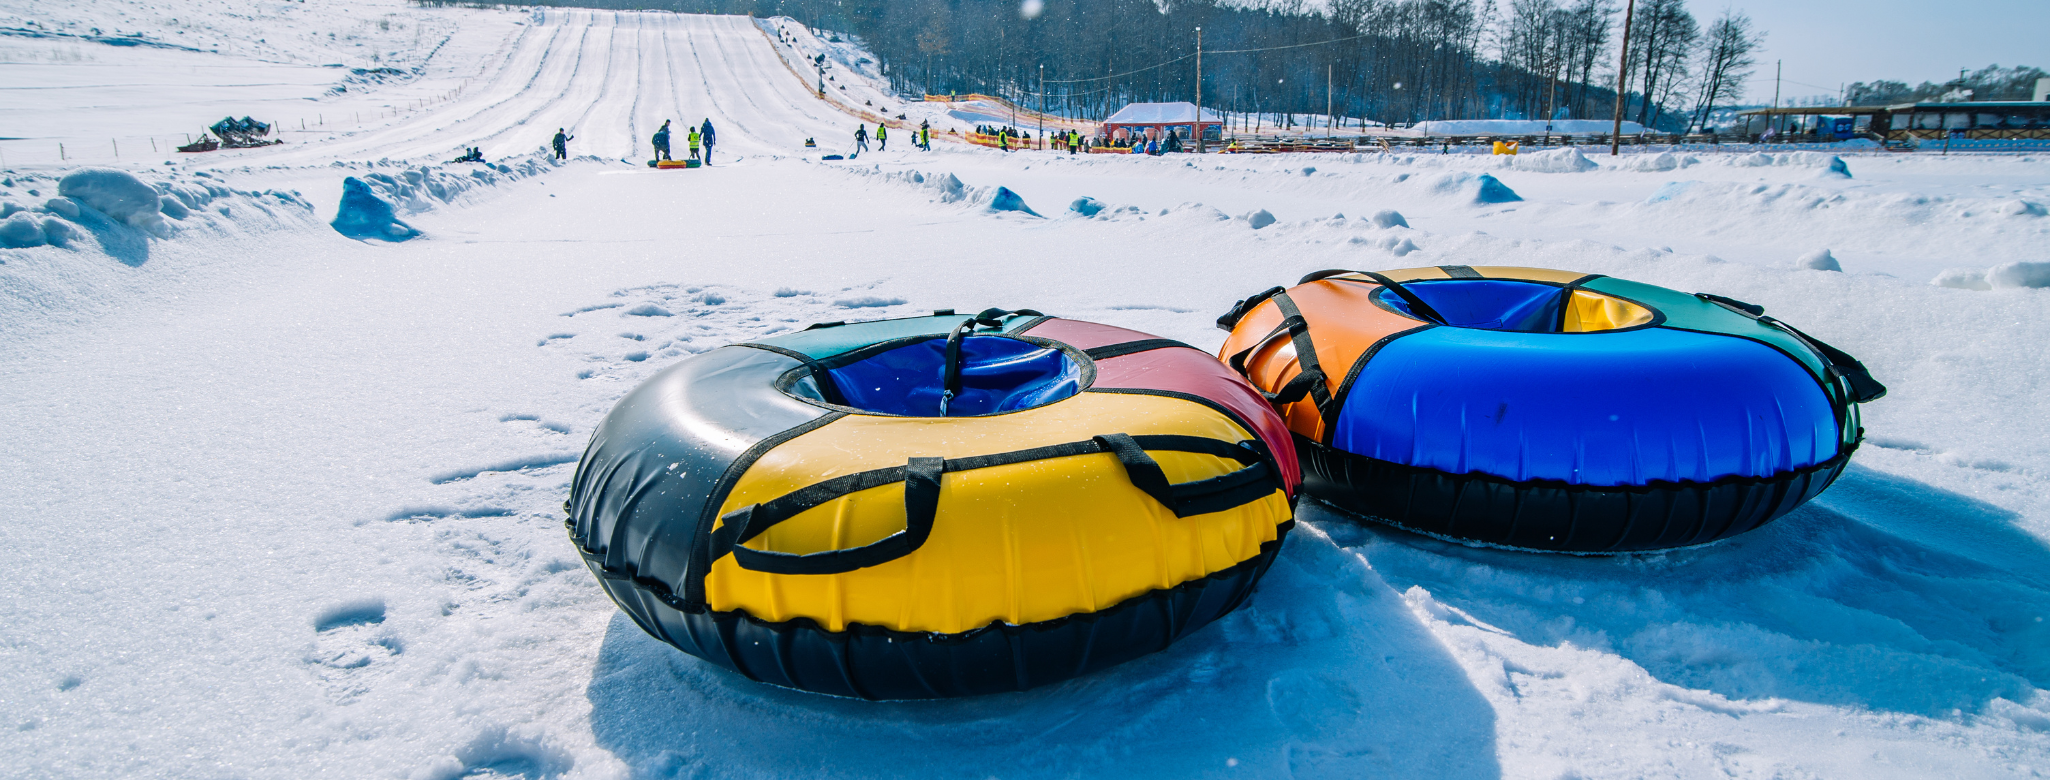 two multicolored sledding tubes at the bottom of a hill